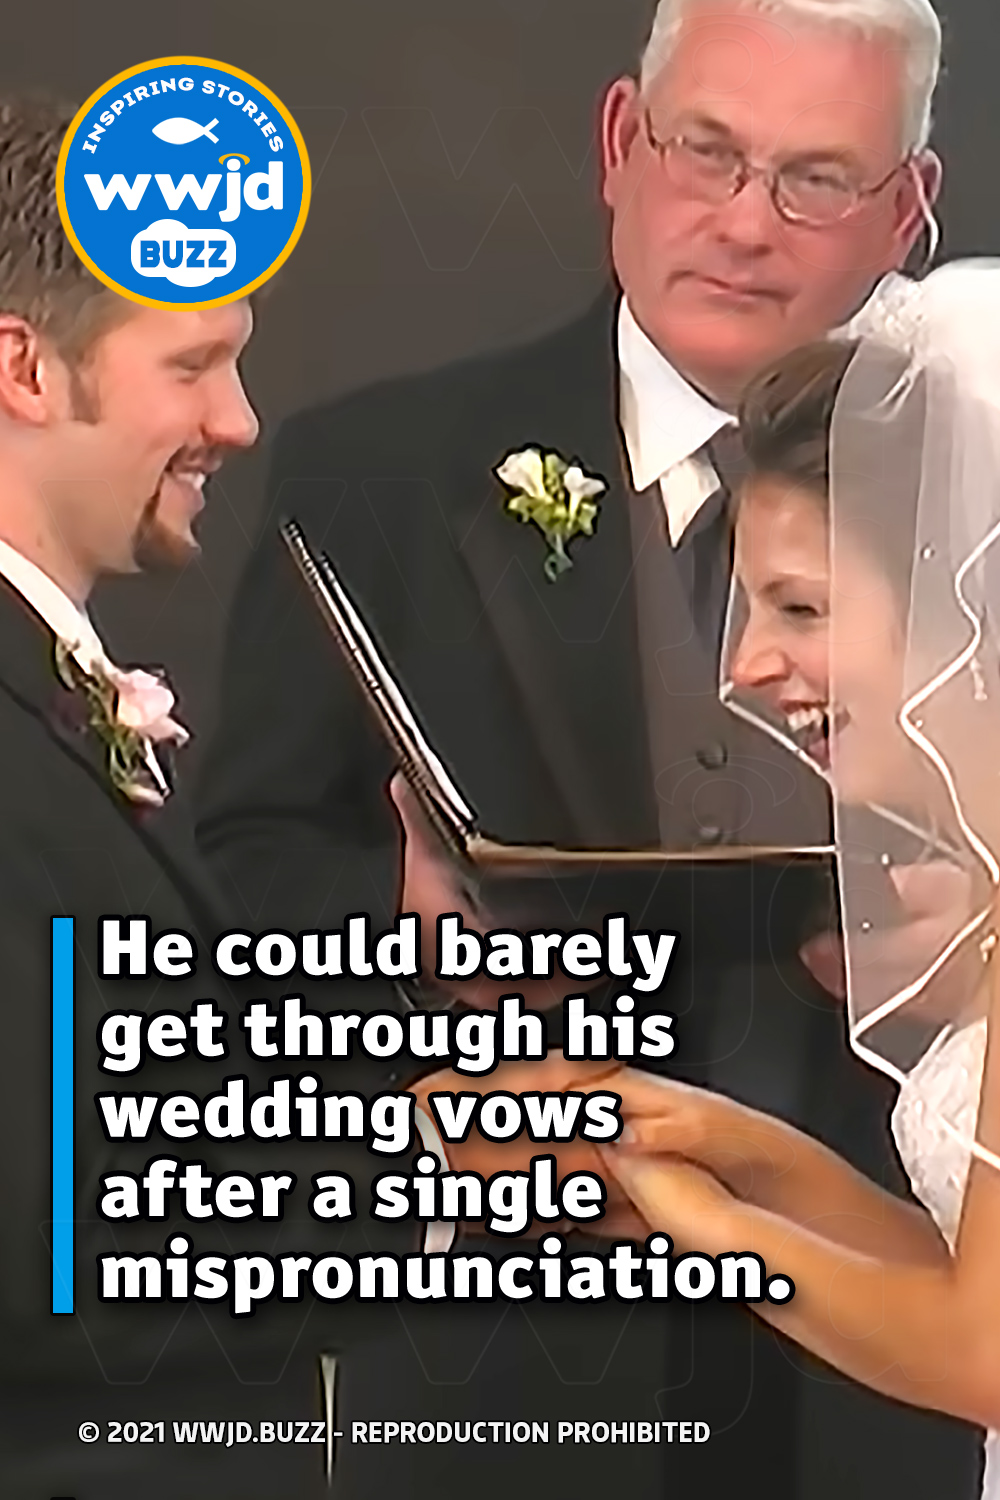 He could barely get through his wedding vows after a single mispronunciation.